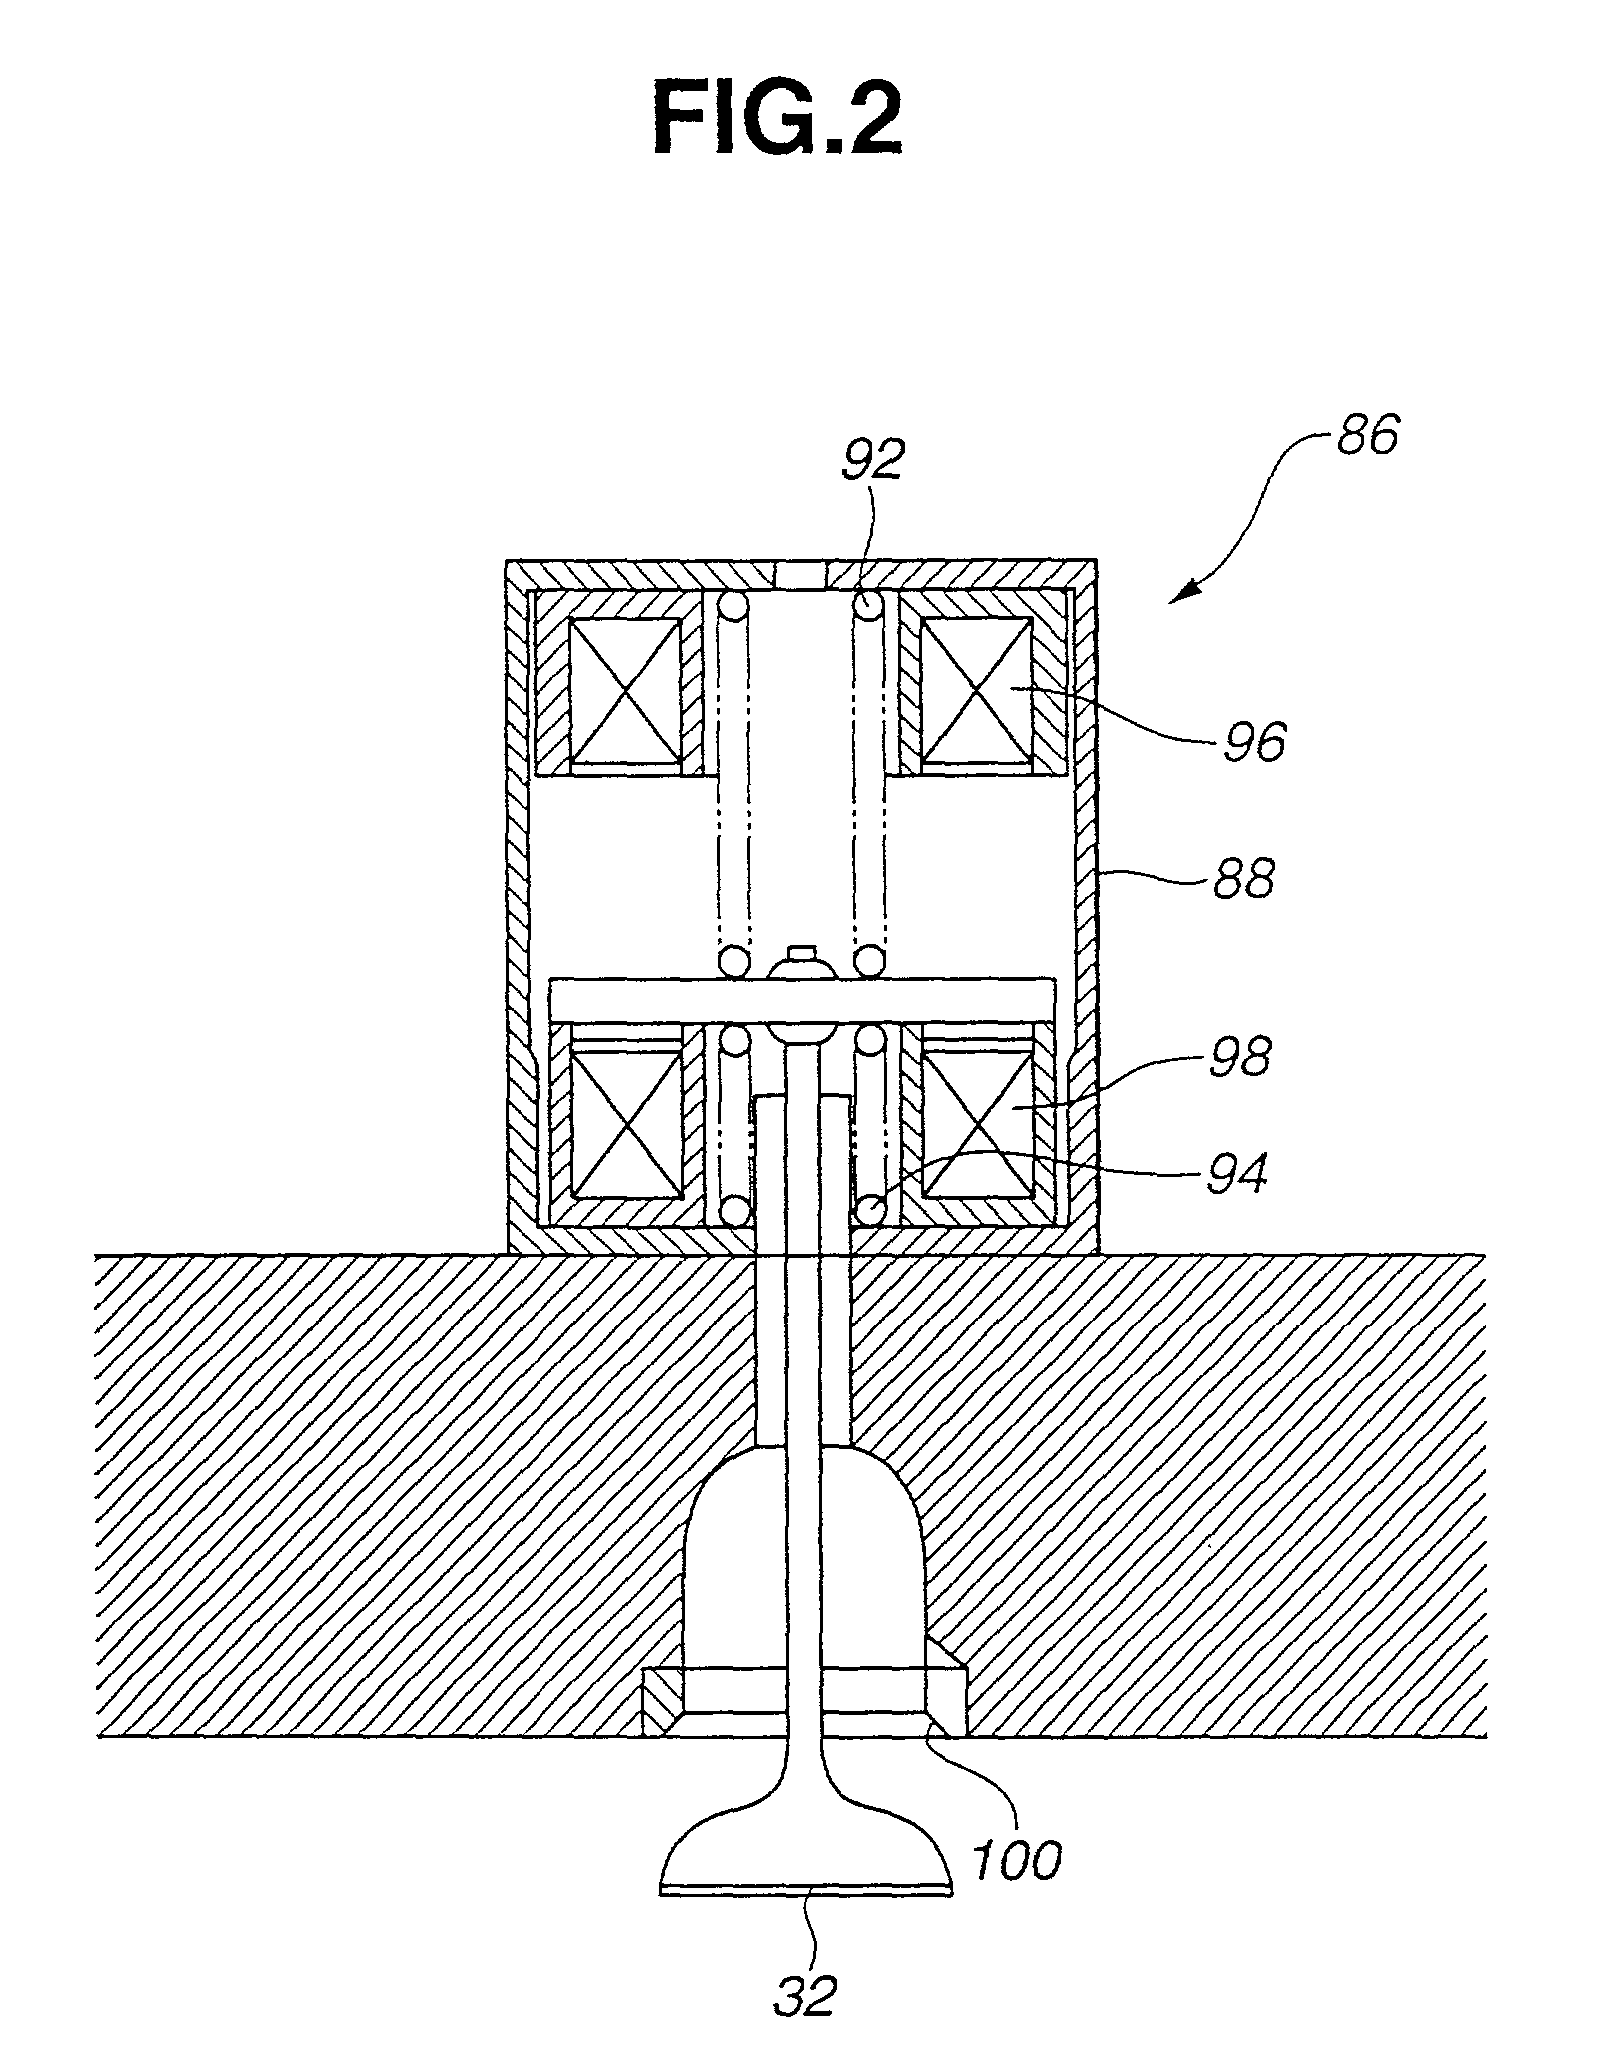 Coordinated valve timing and throttle control for controlling intake air